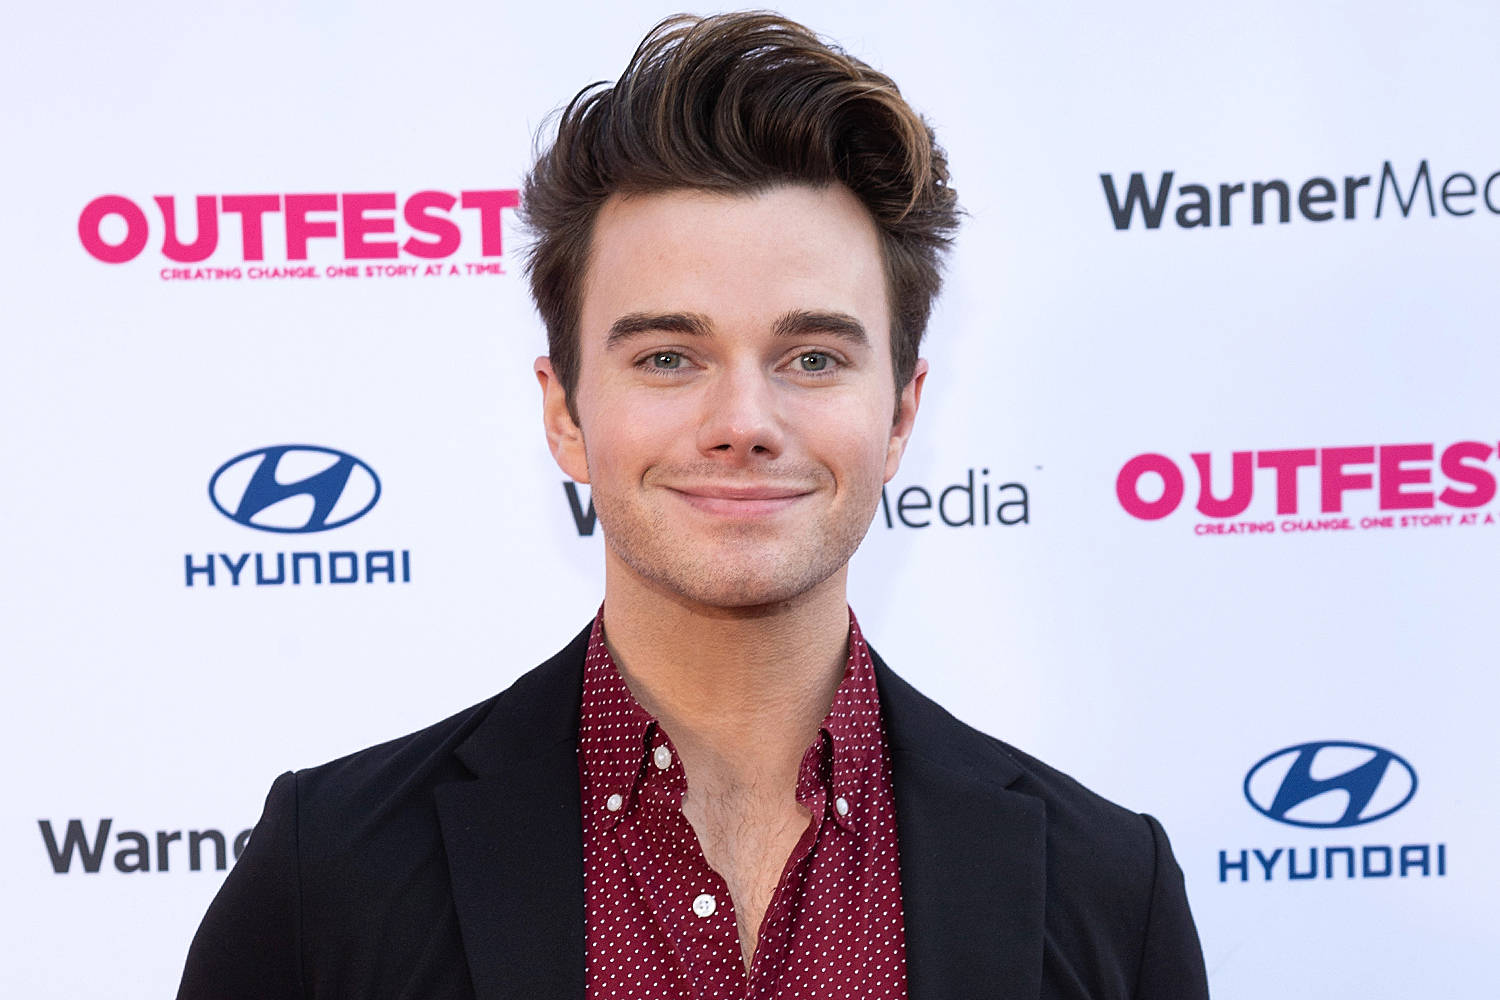 Chris Colfer In Outfest Lgbtq Film Background